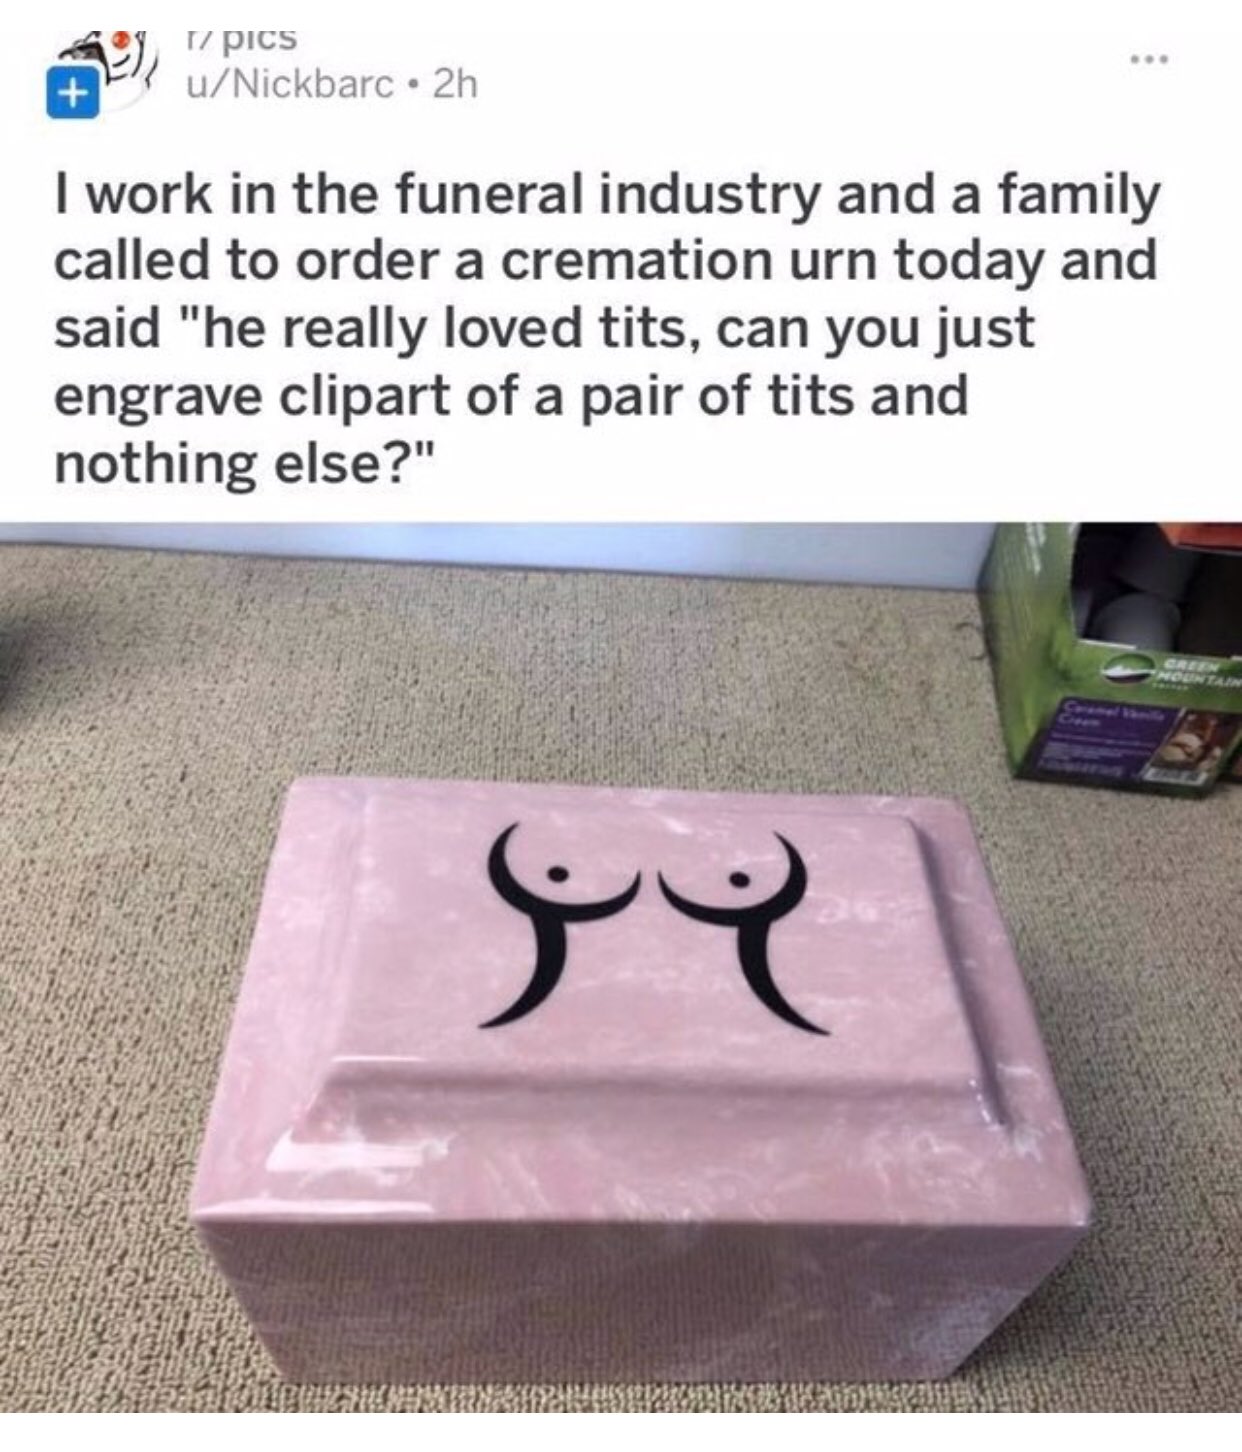 people dancing boobs - 1 Pics uNickbarc 2h I work in the funeral industry and a family called to order a cremation urn today and said "he really loved tits, can you just engrave clipart of a pair of tits and nothing else?"